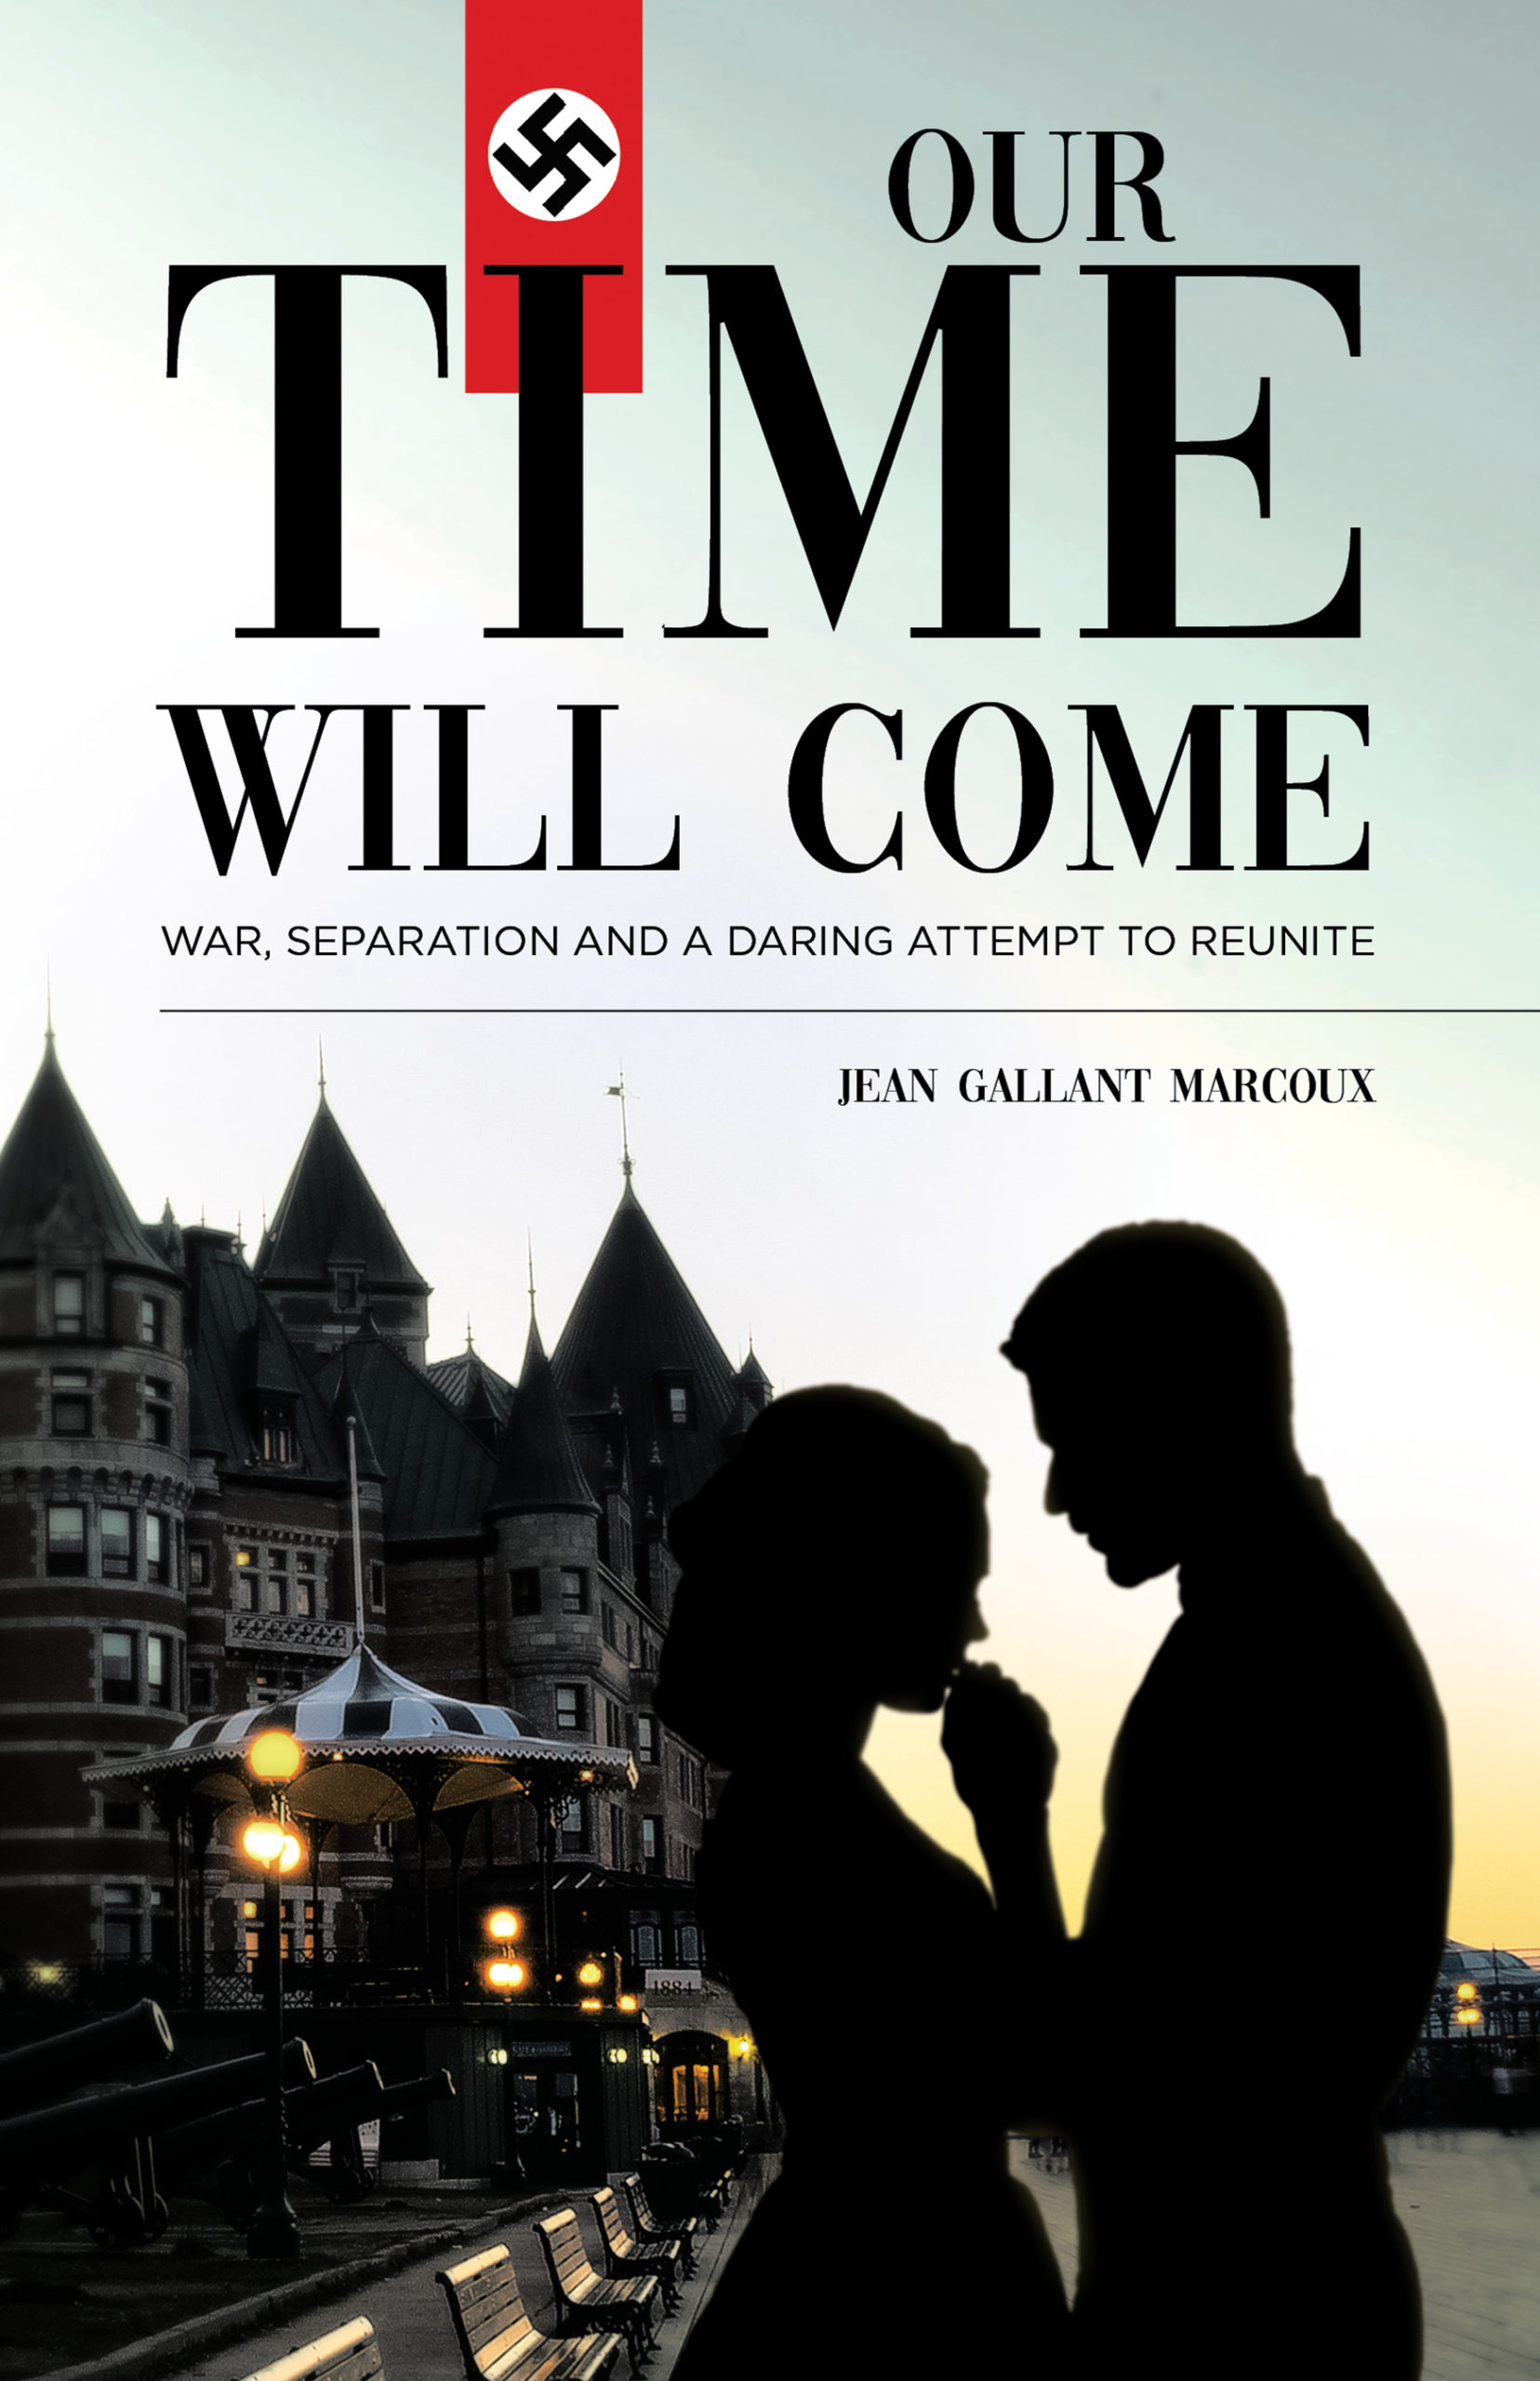 Our Time Will Come by Jean Gallant Marcoux